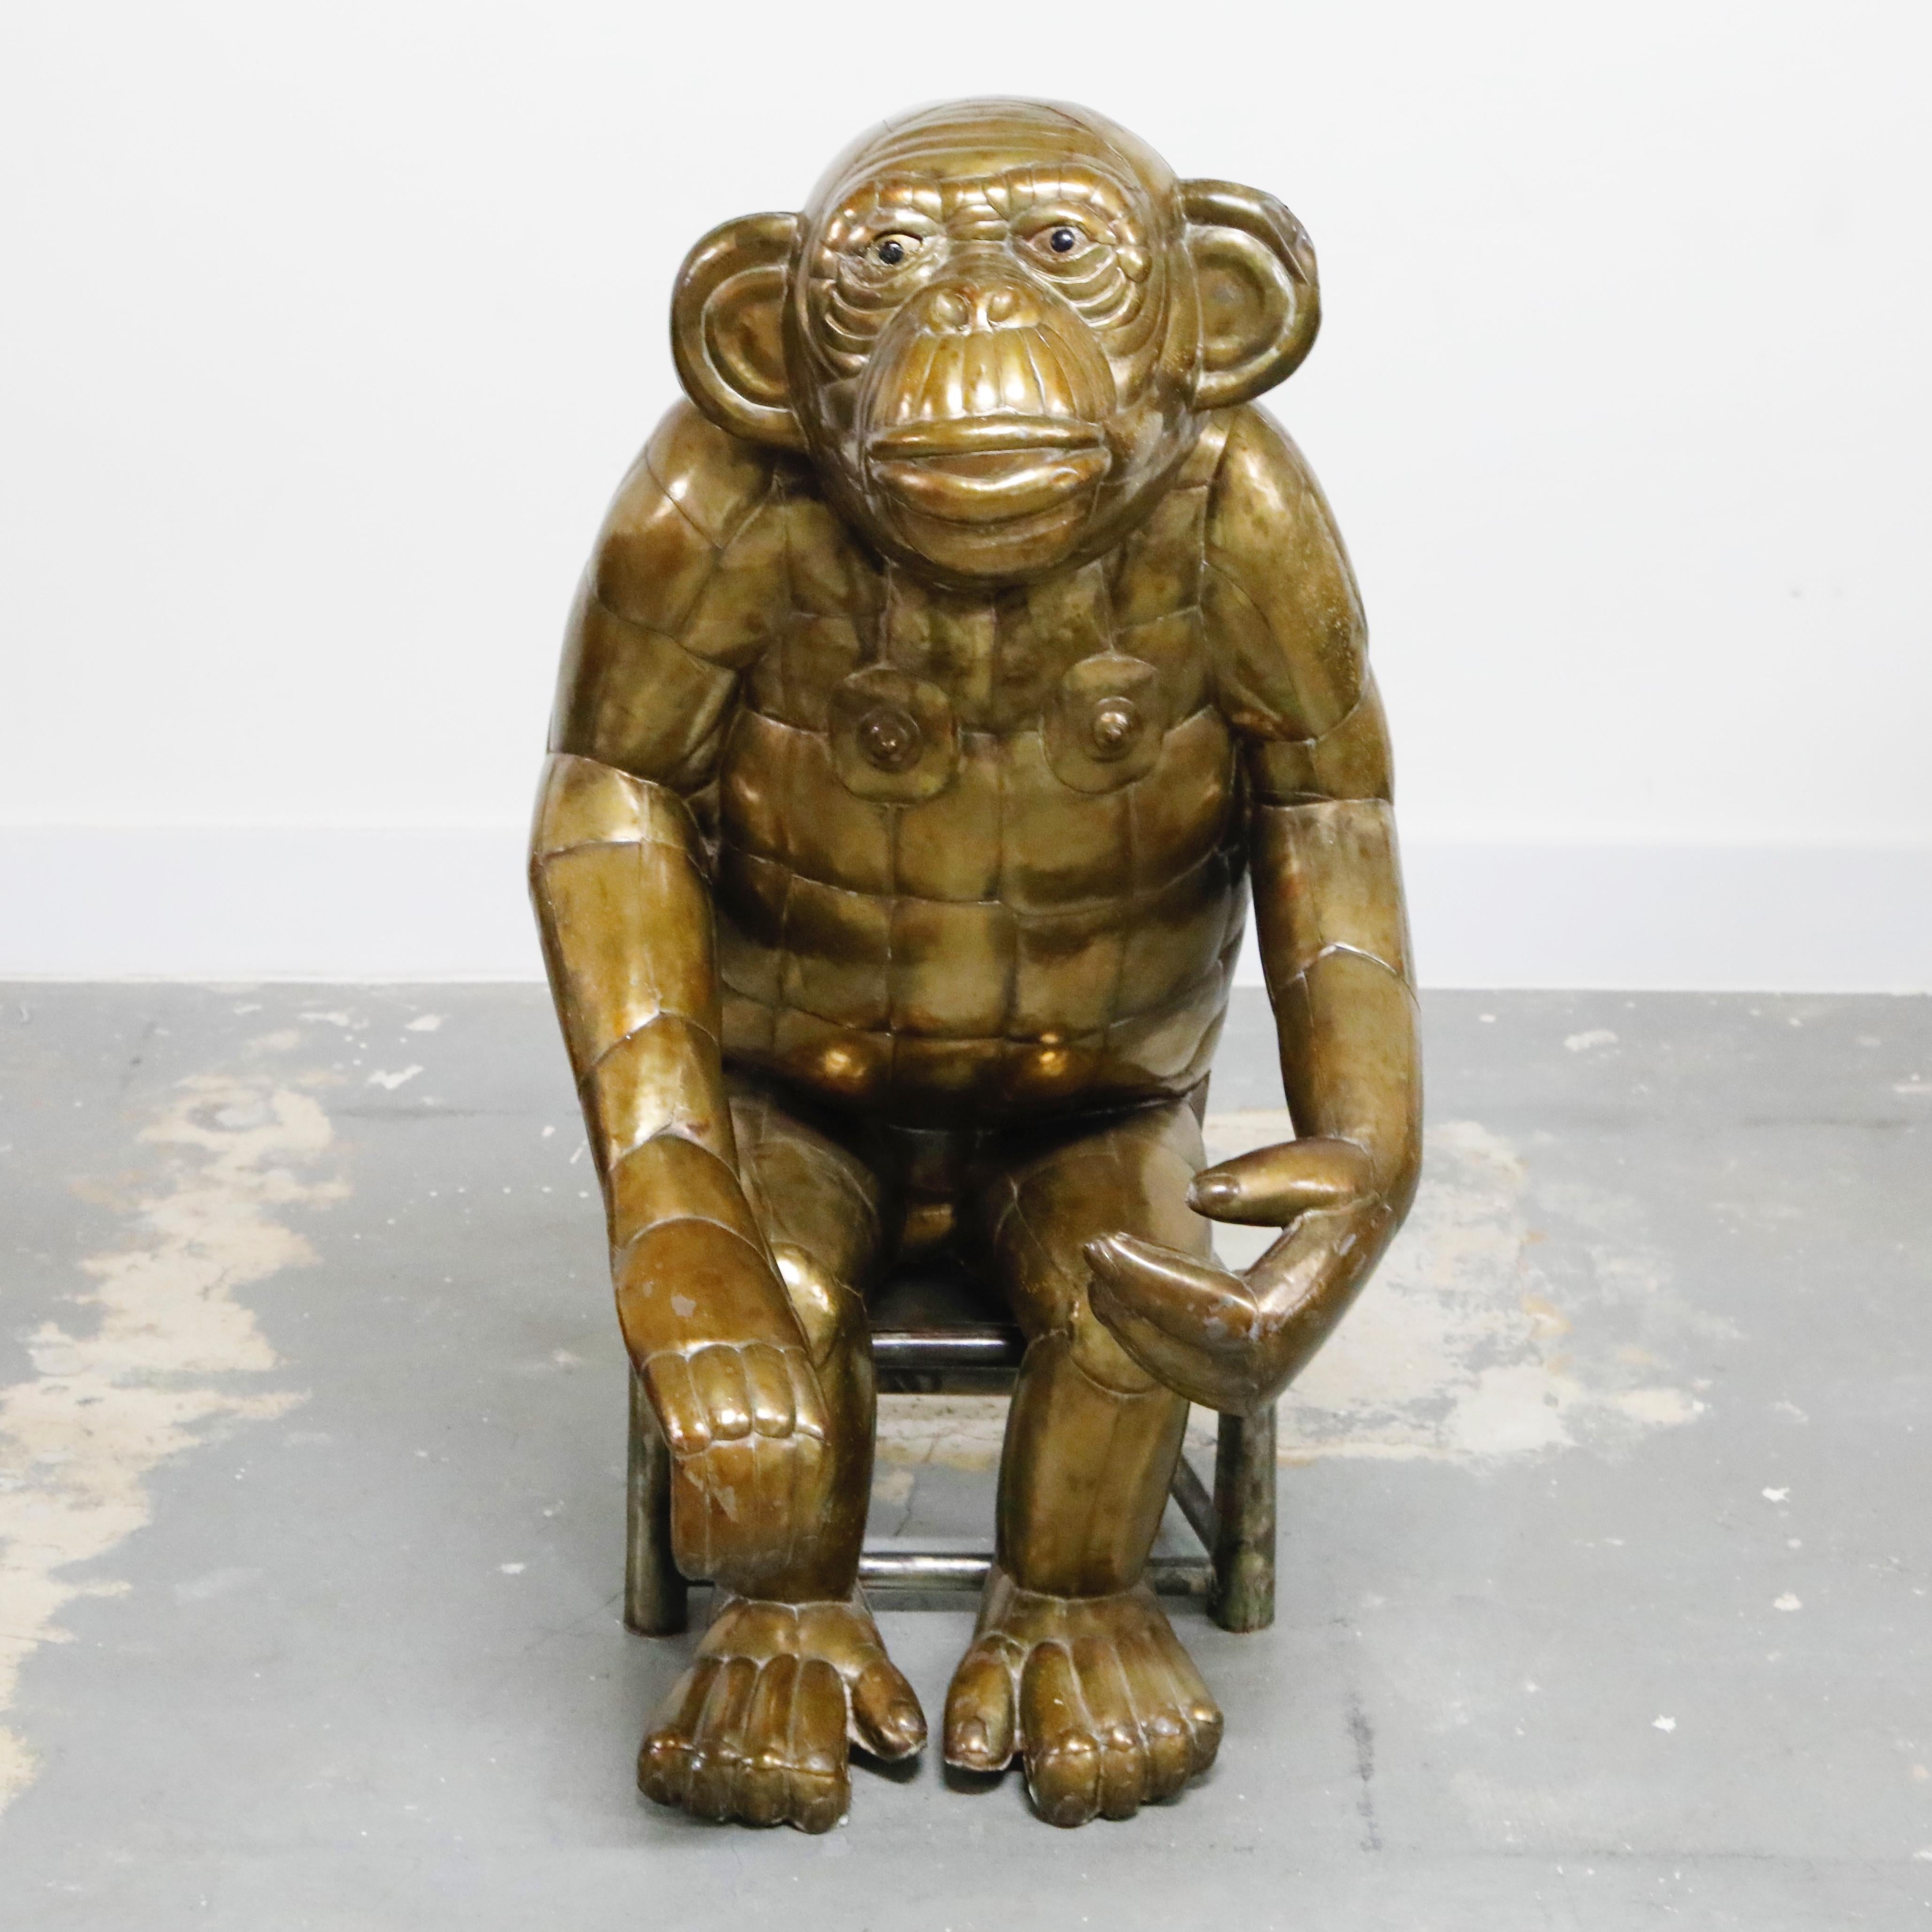 That funky monkey... this incredible and very wild brass monkey sculpture (43